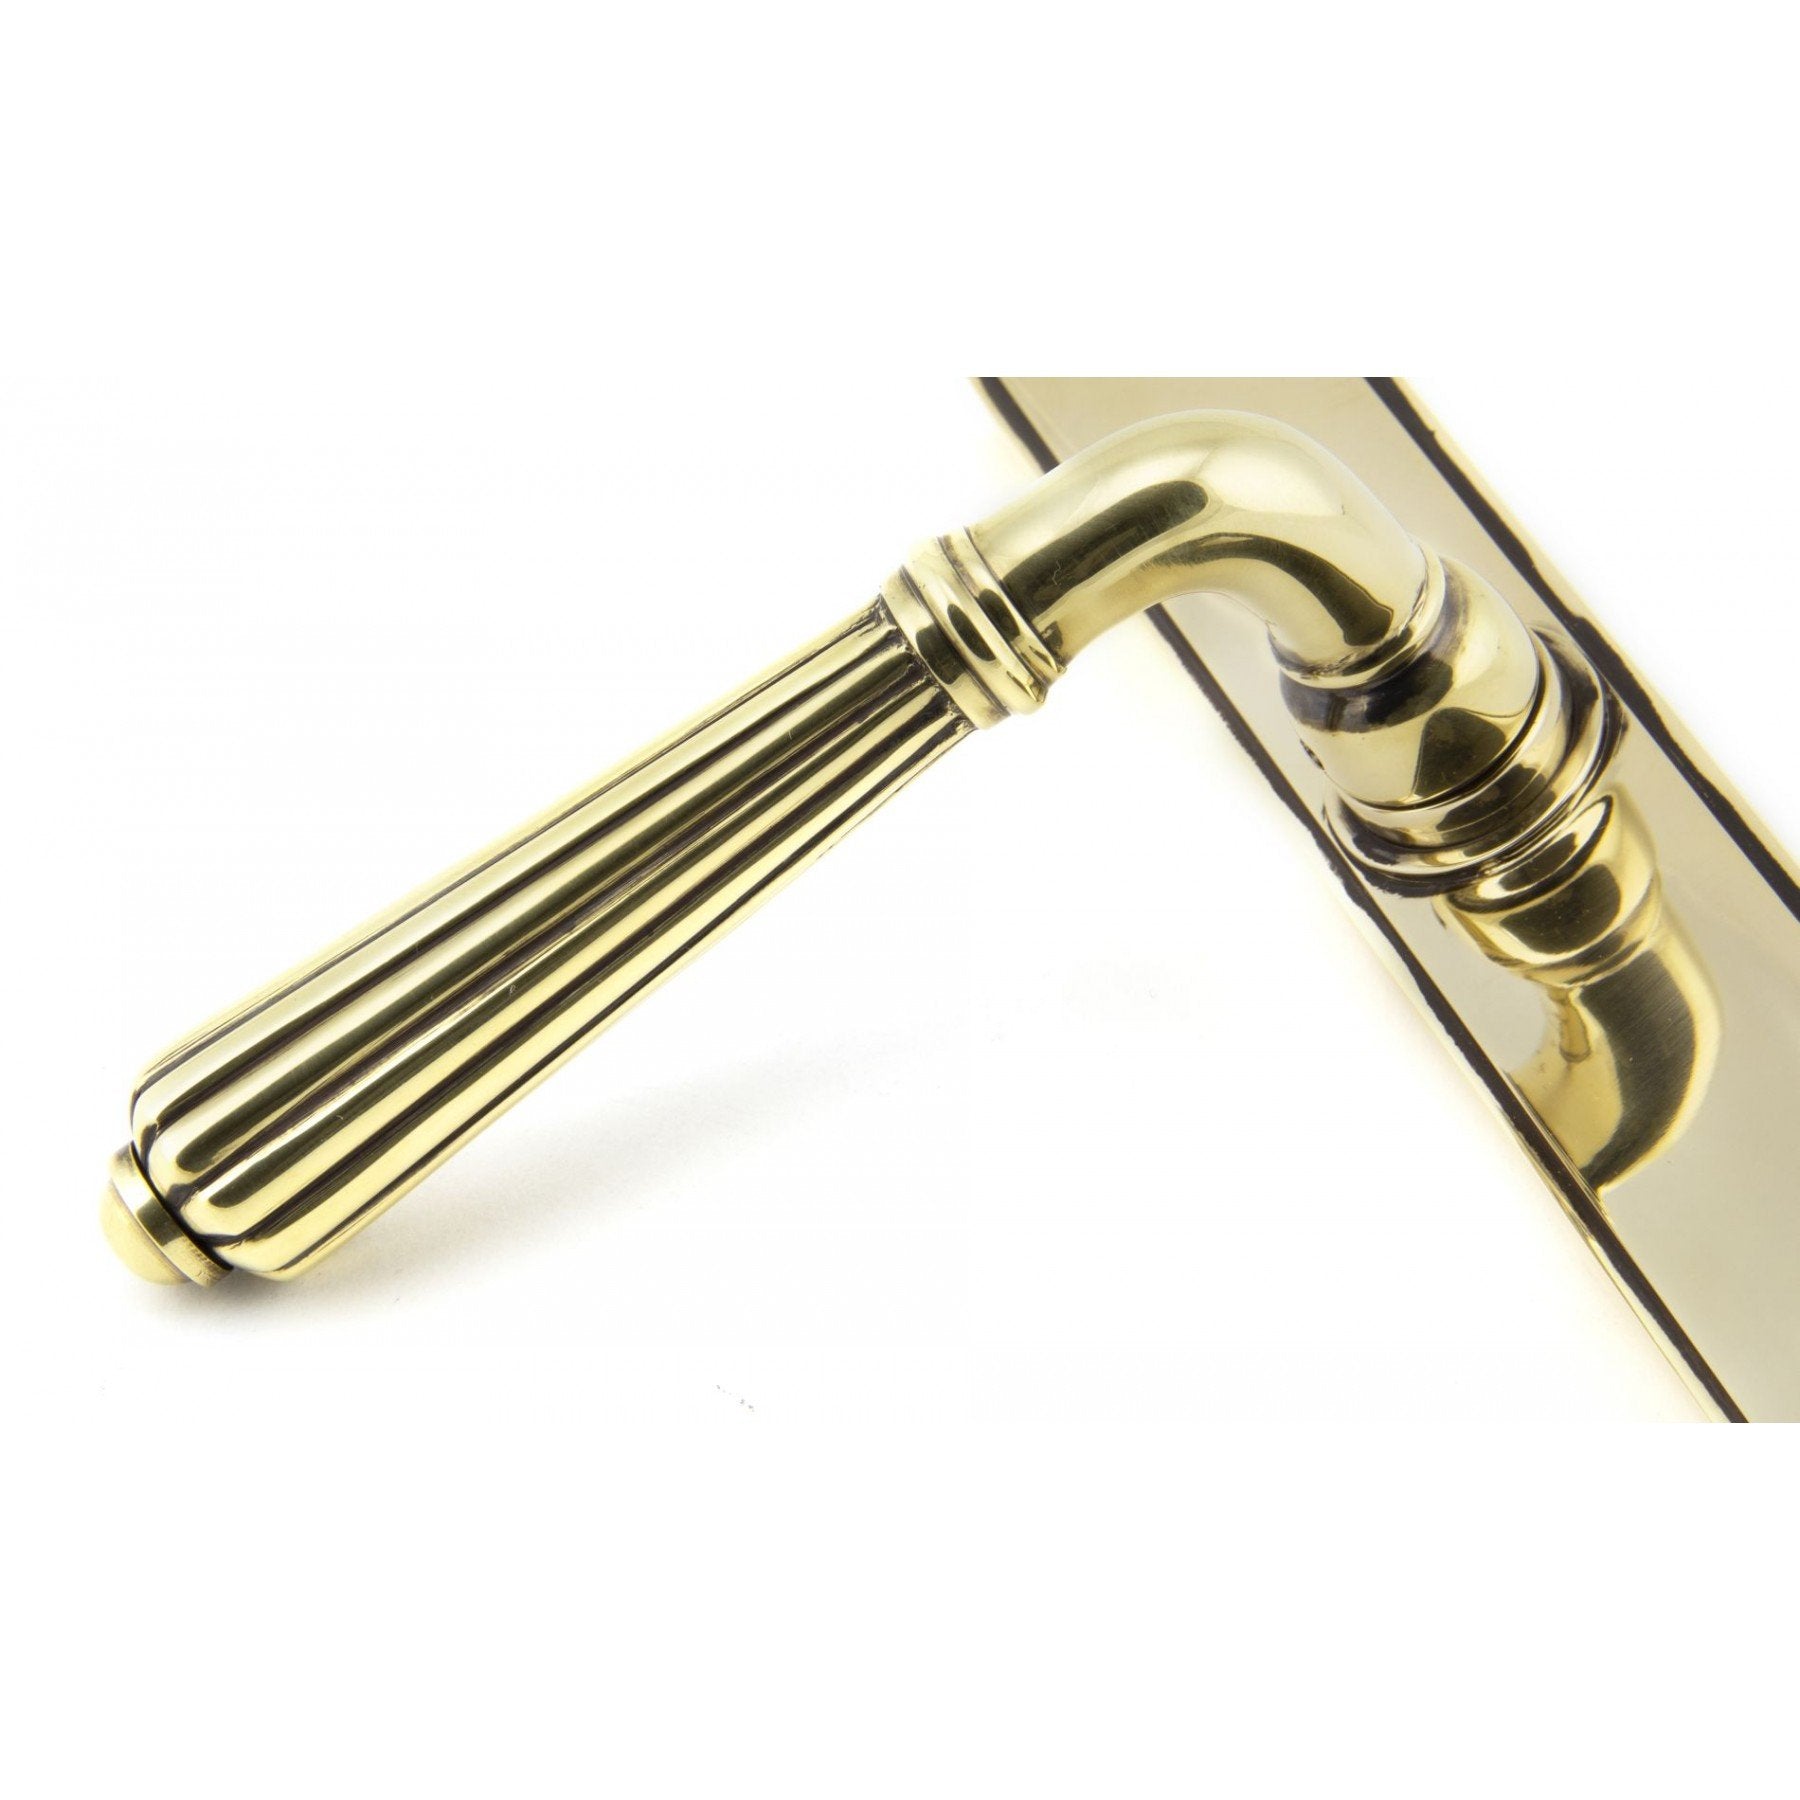 From the Anvil Aged Brass Hinton Slimline Lever Espag. Lock Set